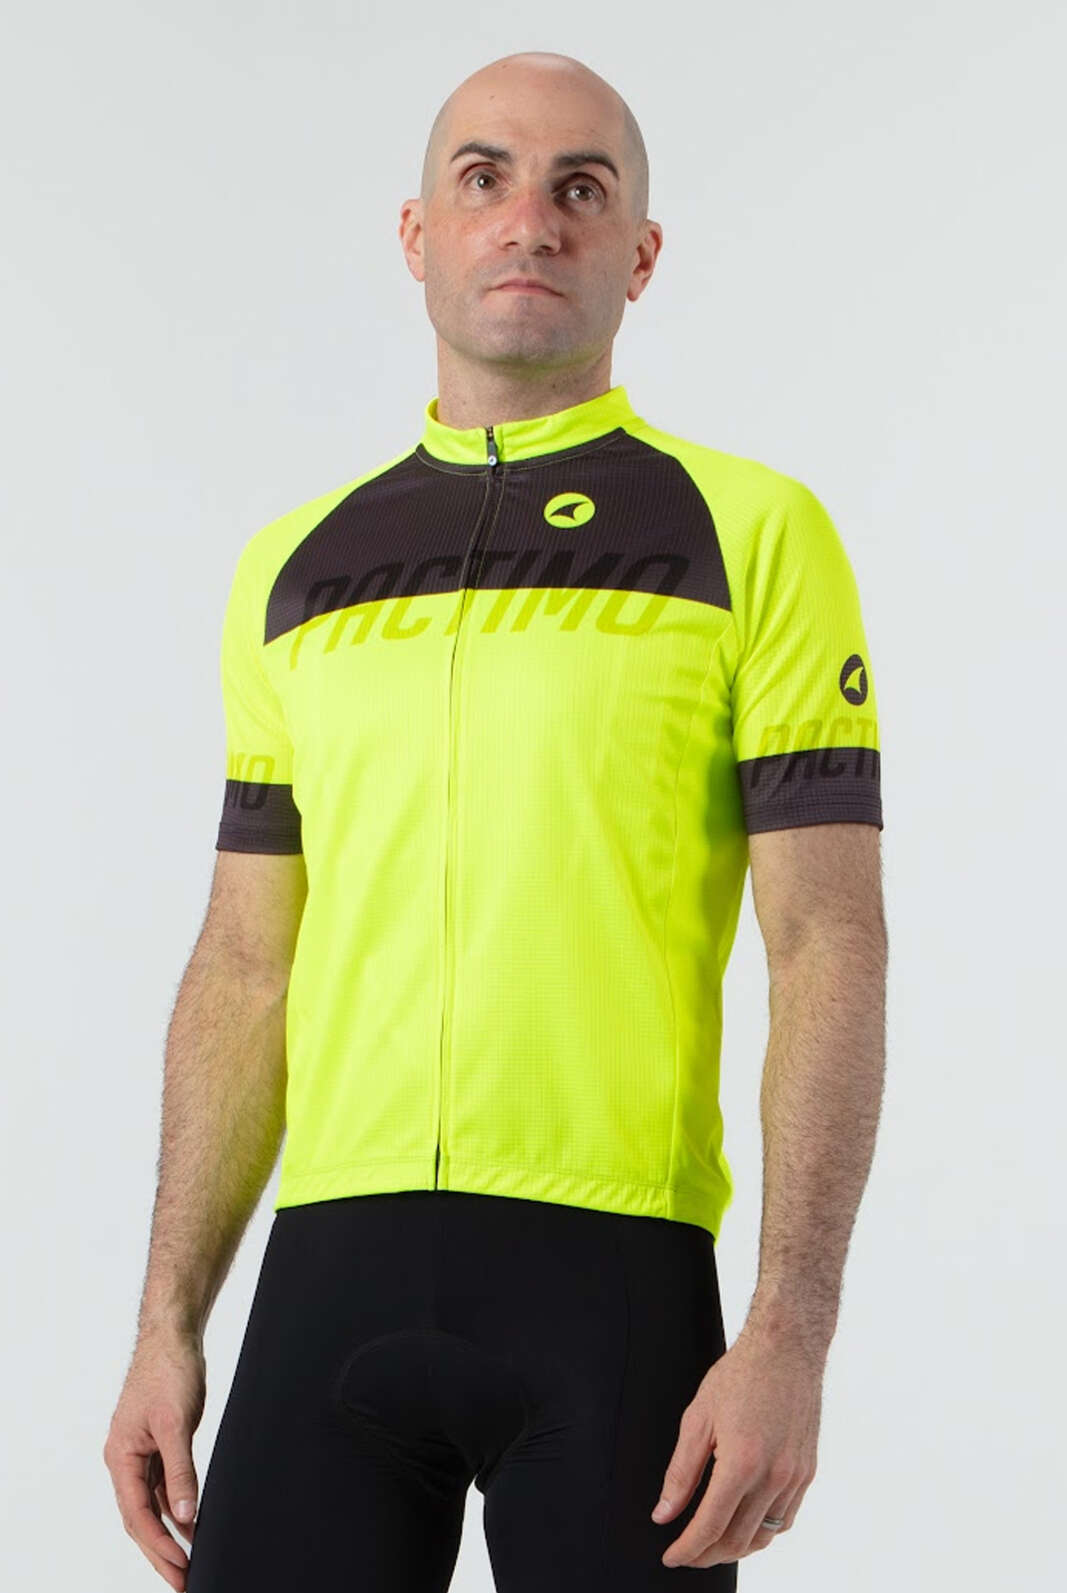 Men's High-Viz Yellow Relaxed Fit Cycling Jersey - Front View